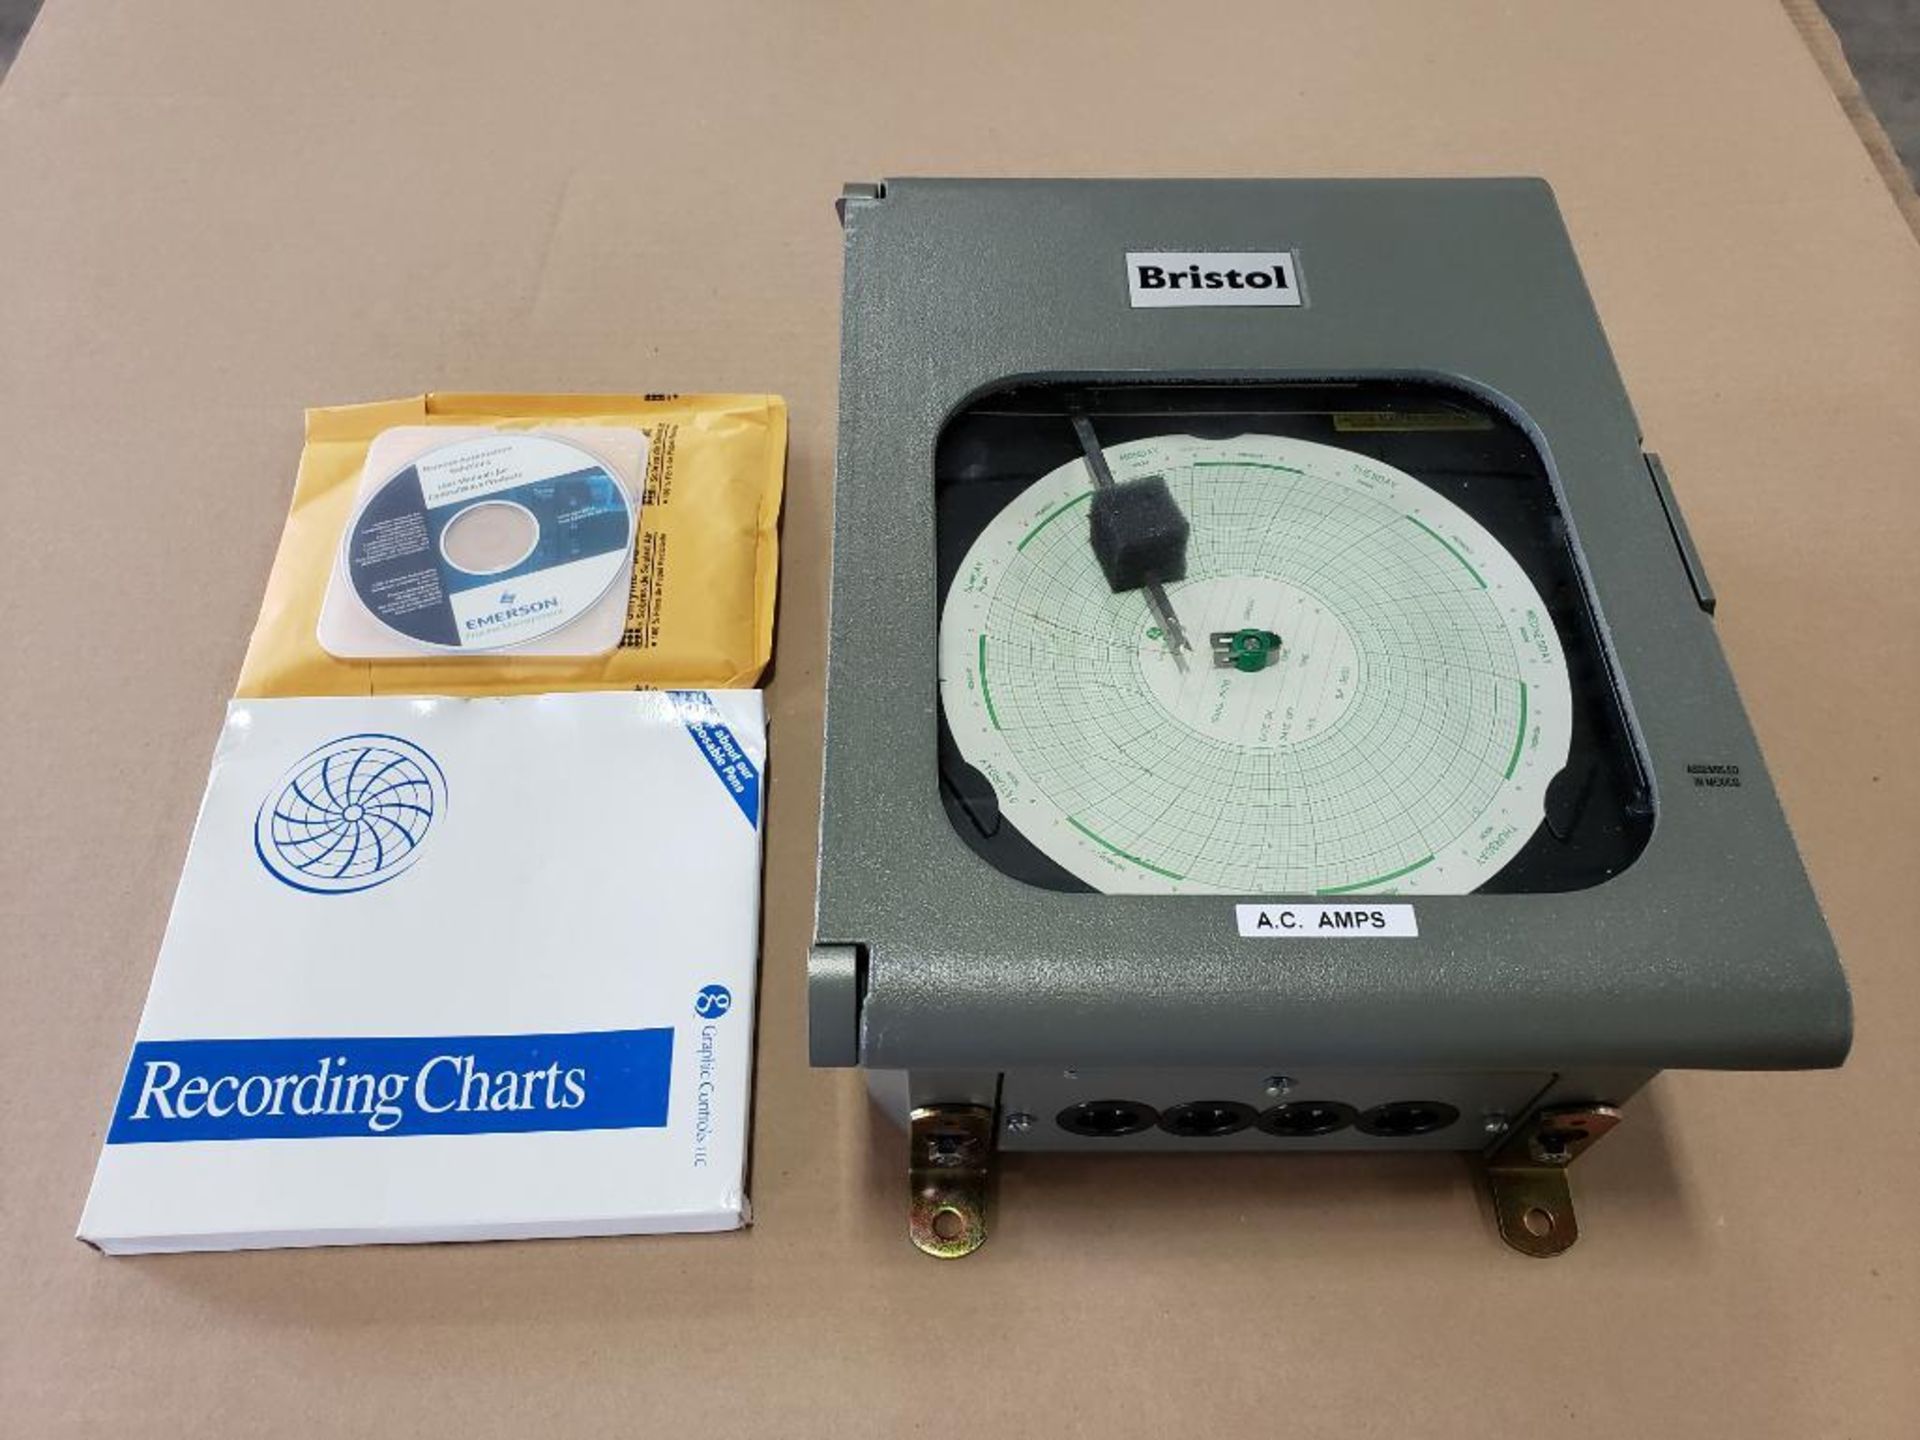 Qty 2 - Emerson Controls Bristol AC Amp chart recorder. Part number 410887B02. New in box.